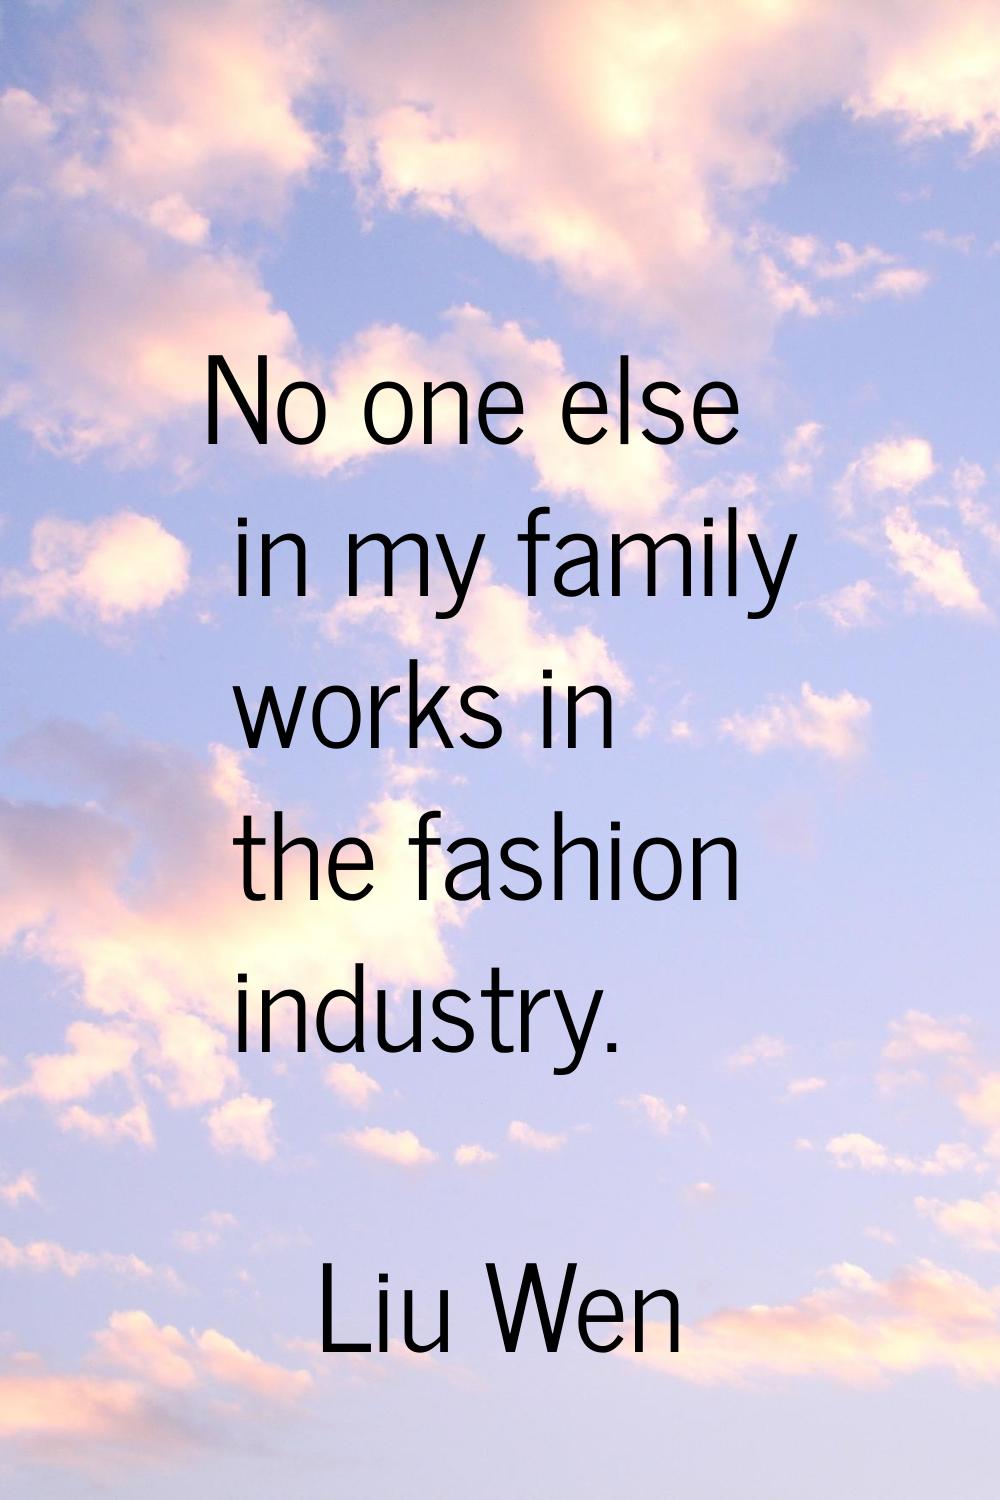 No one else in my family works in the fashion industry.